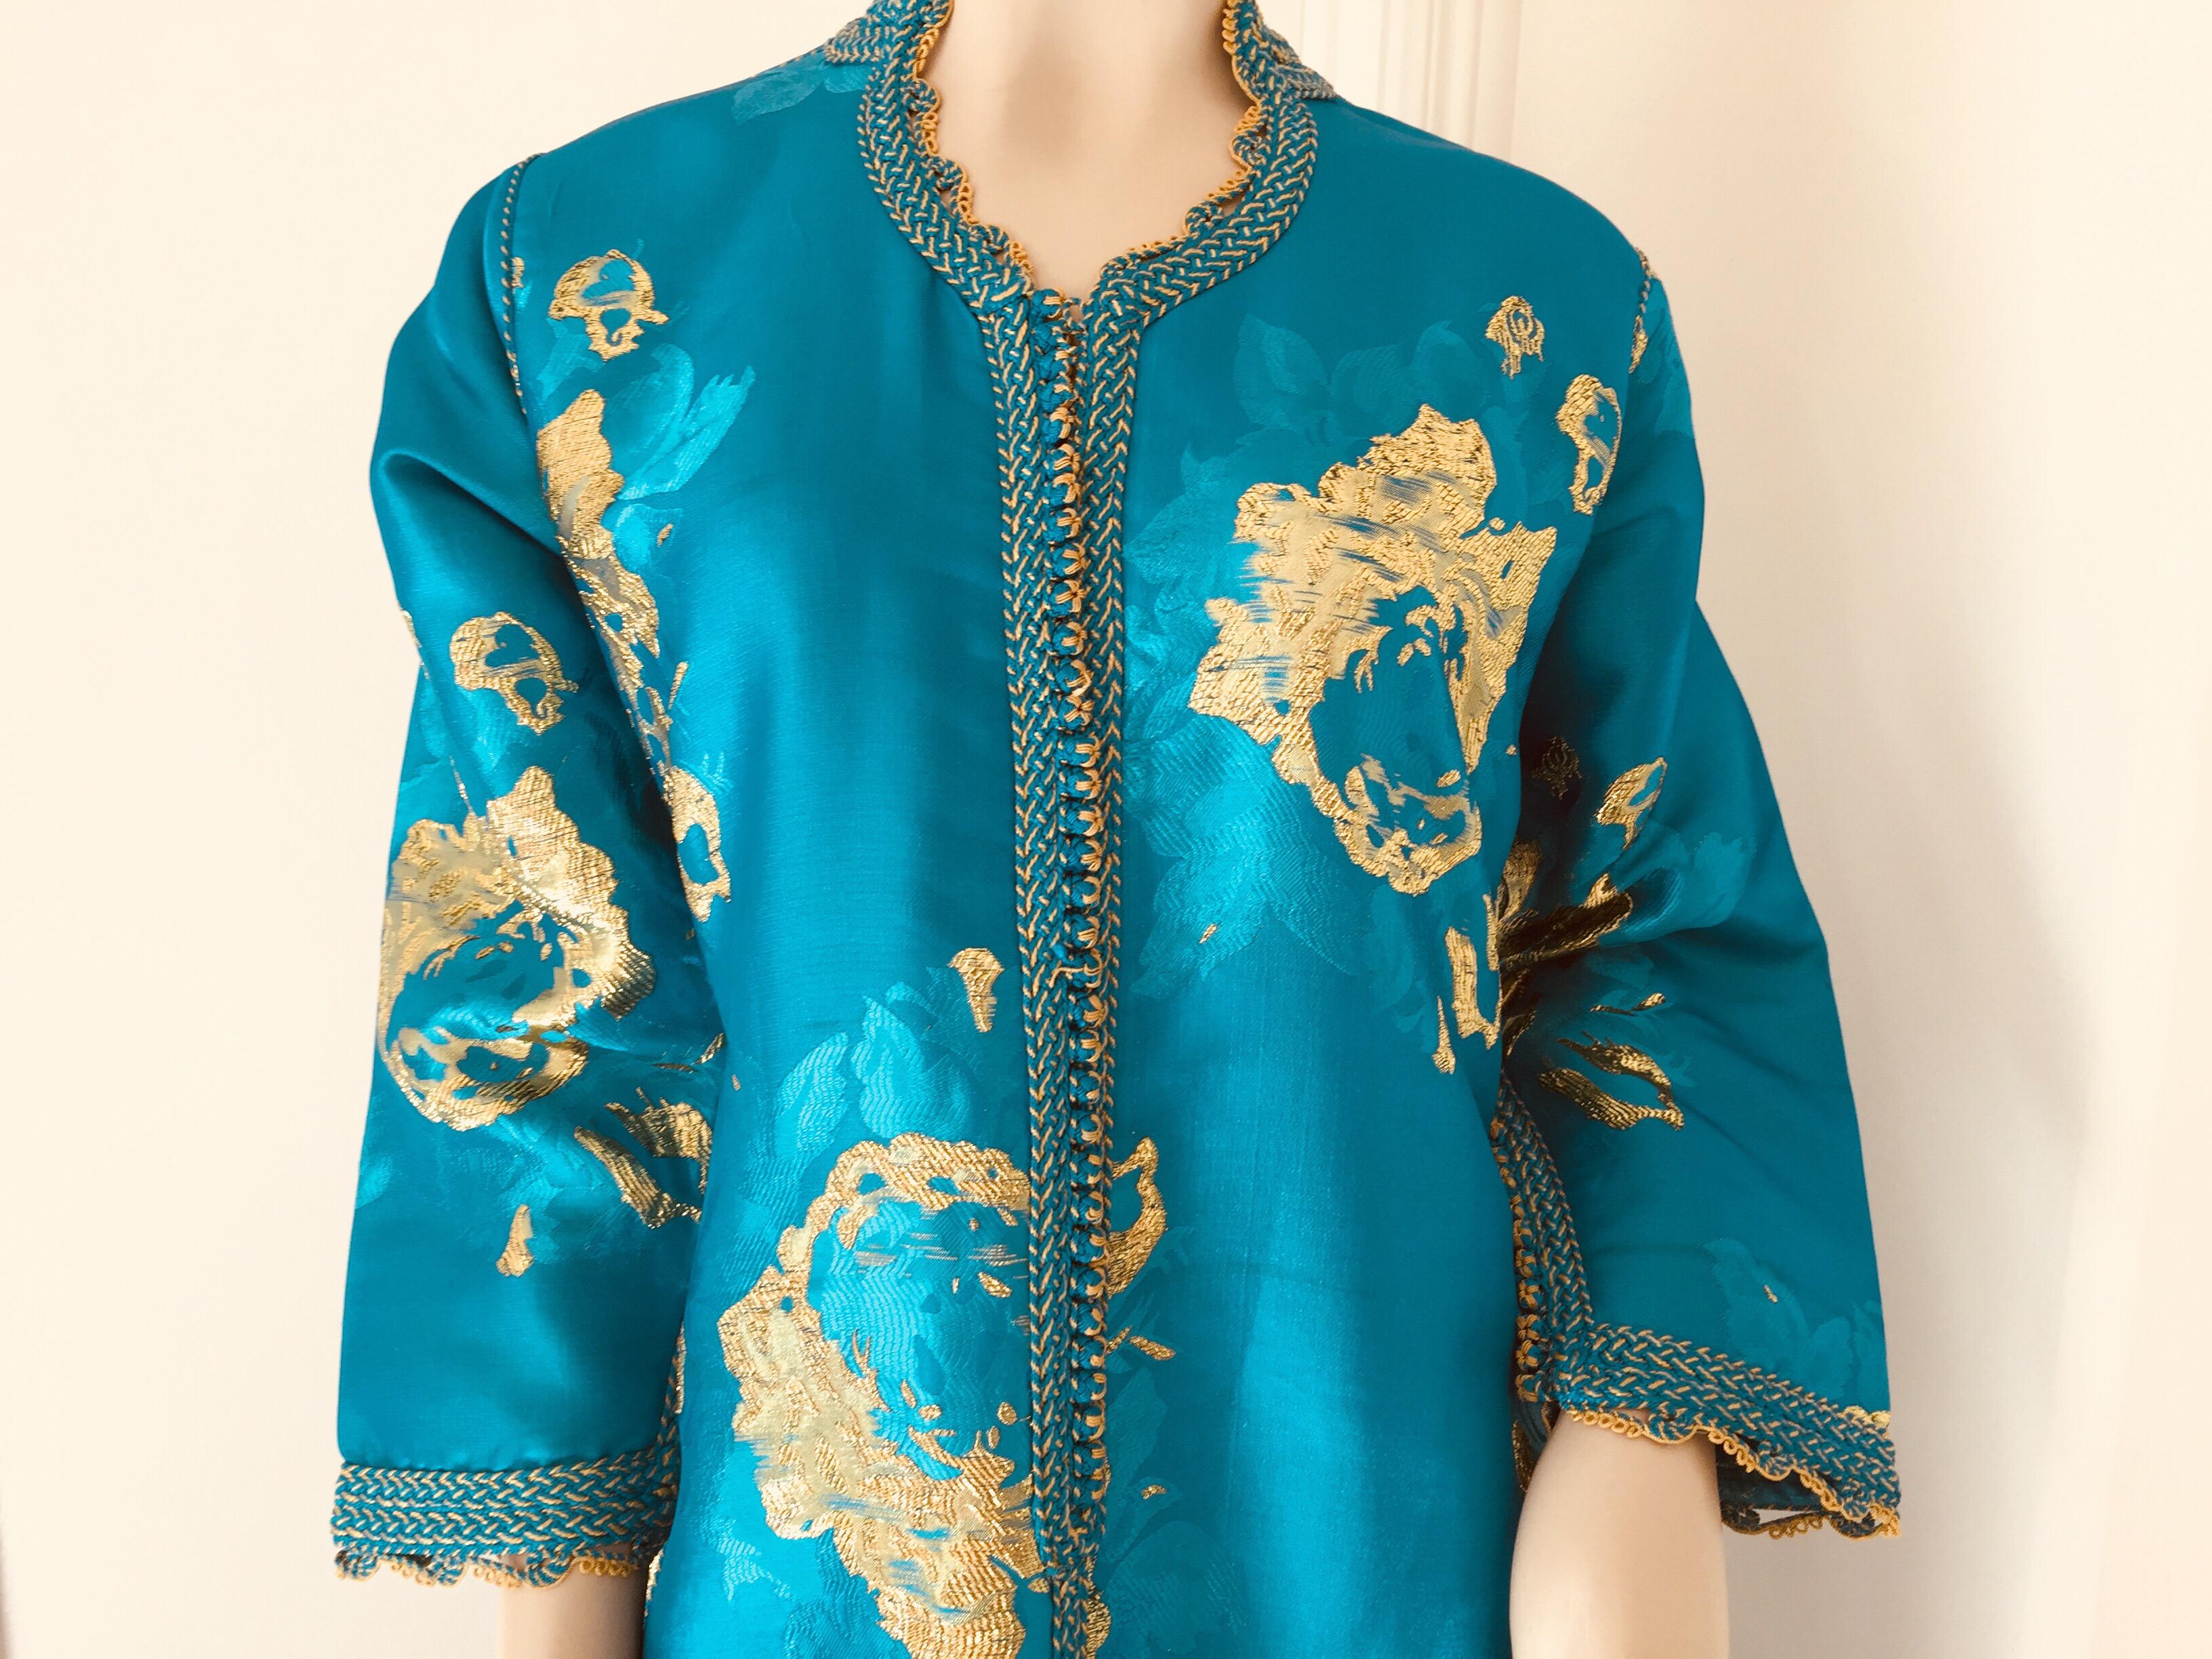 Moroccan Vintage Kaftan in Turquoise and Gold Floral Brocade Metallic Lame 1